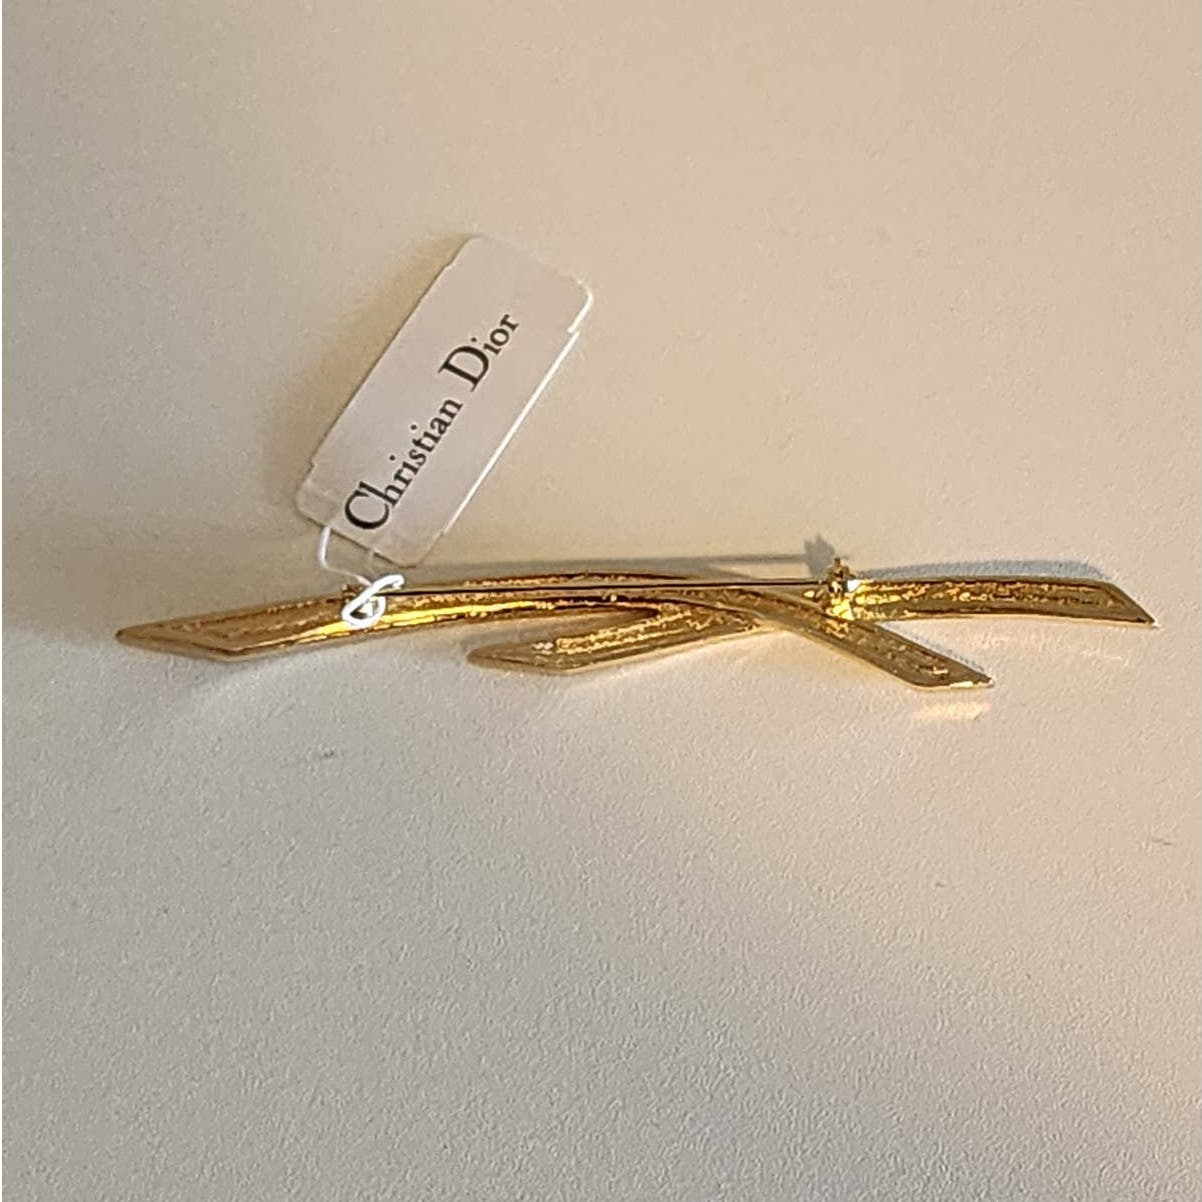 Vintage Christian Dior Gold Crystal Brooch Pin New with tags